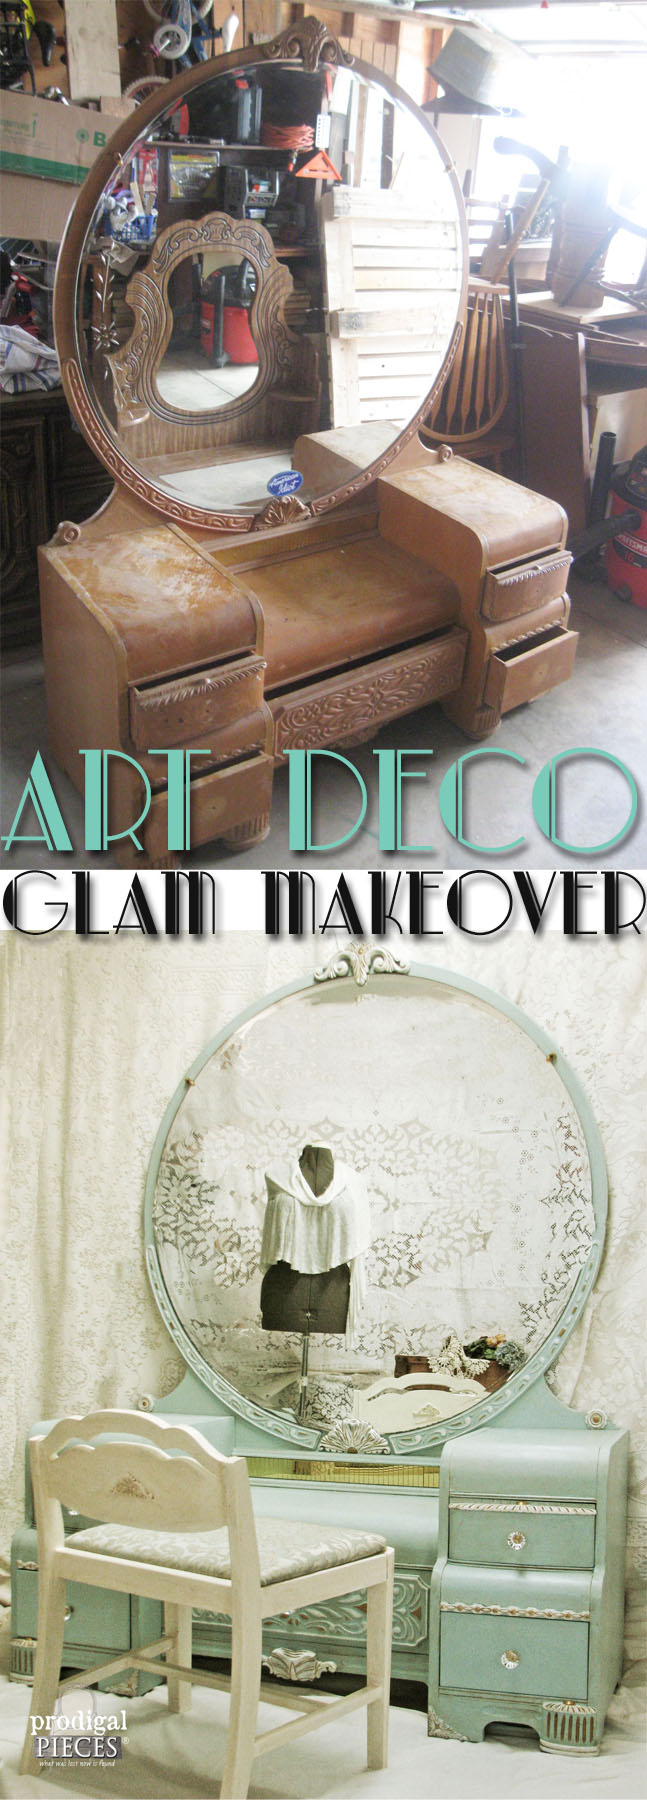 Art Deco Glam Makeover by Prodigal Pieces prodigalpieces.com #prodigalpieces